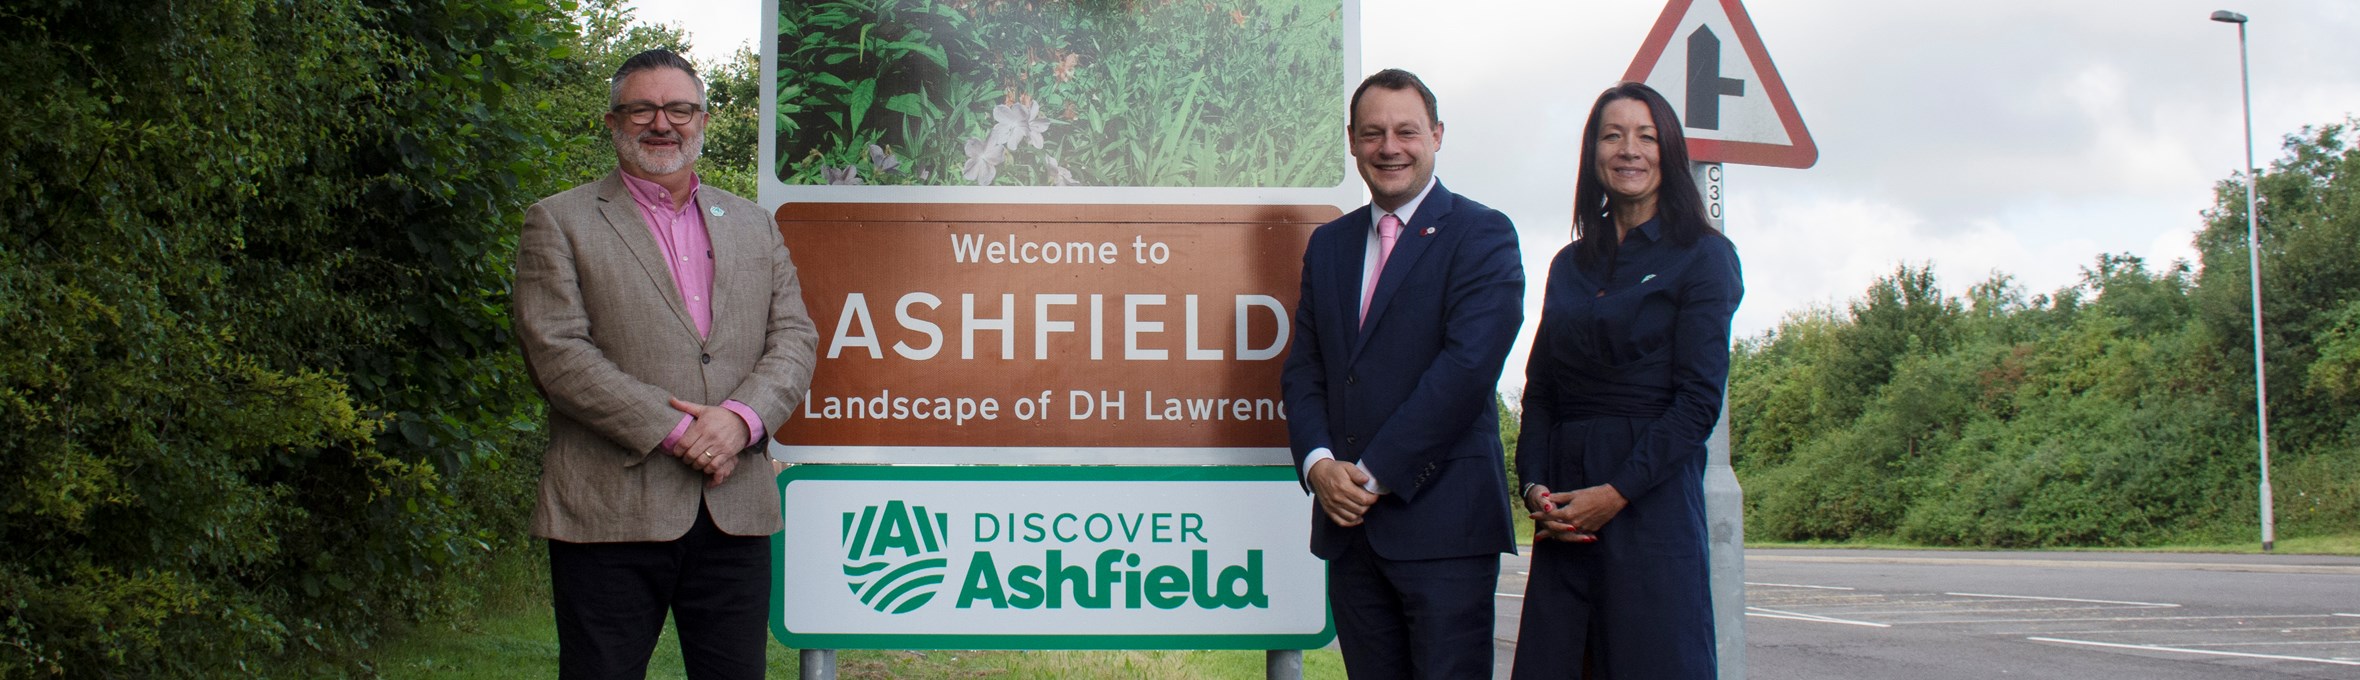 Martin Rigley, Cllr Jason Zadrozny, and Theresa Hodgkinson, CEO stand in front of Ashfield road sign